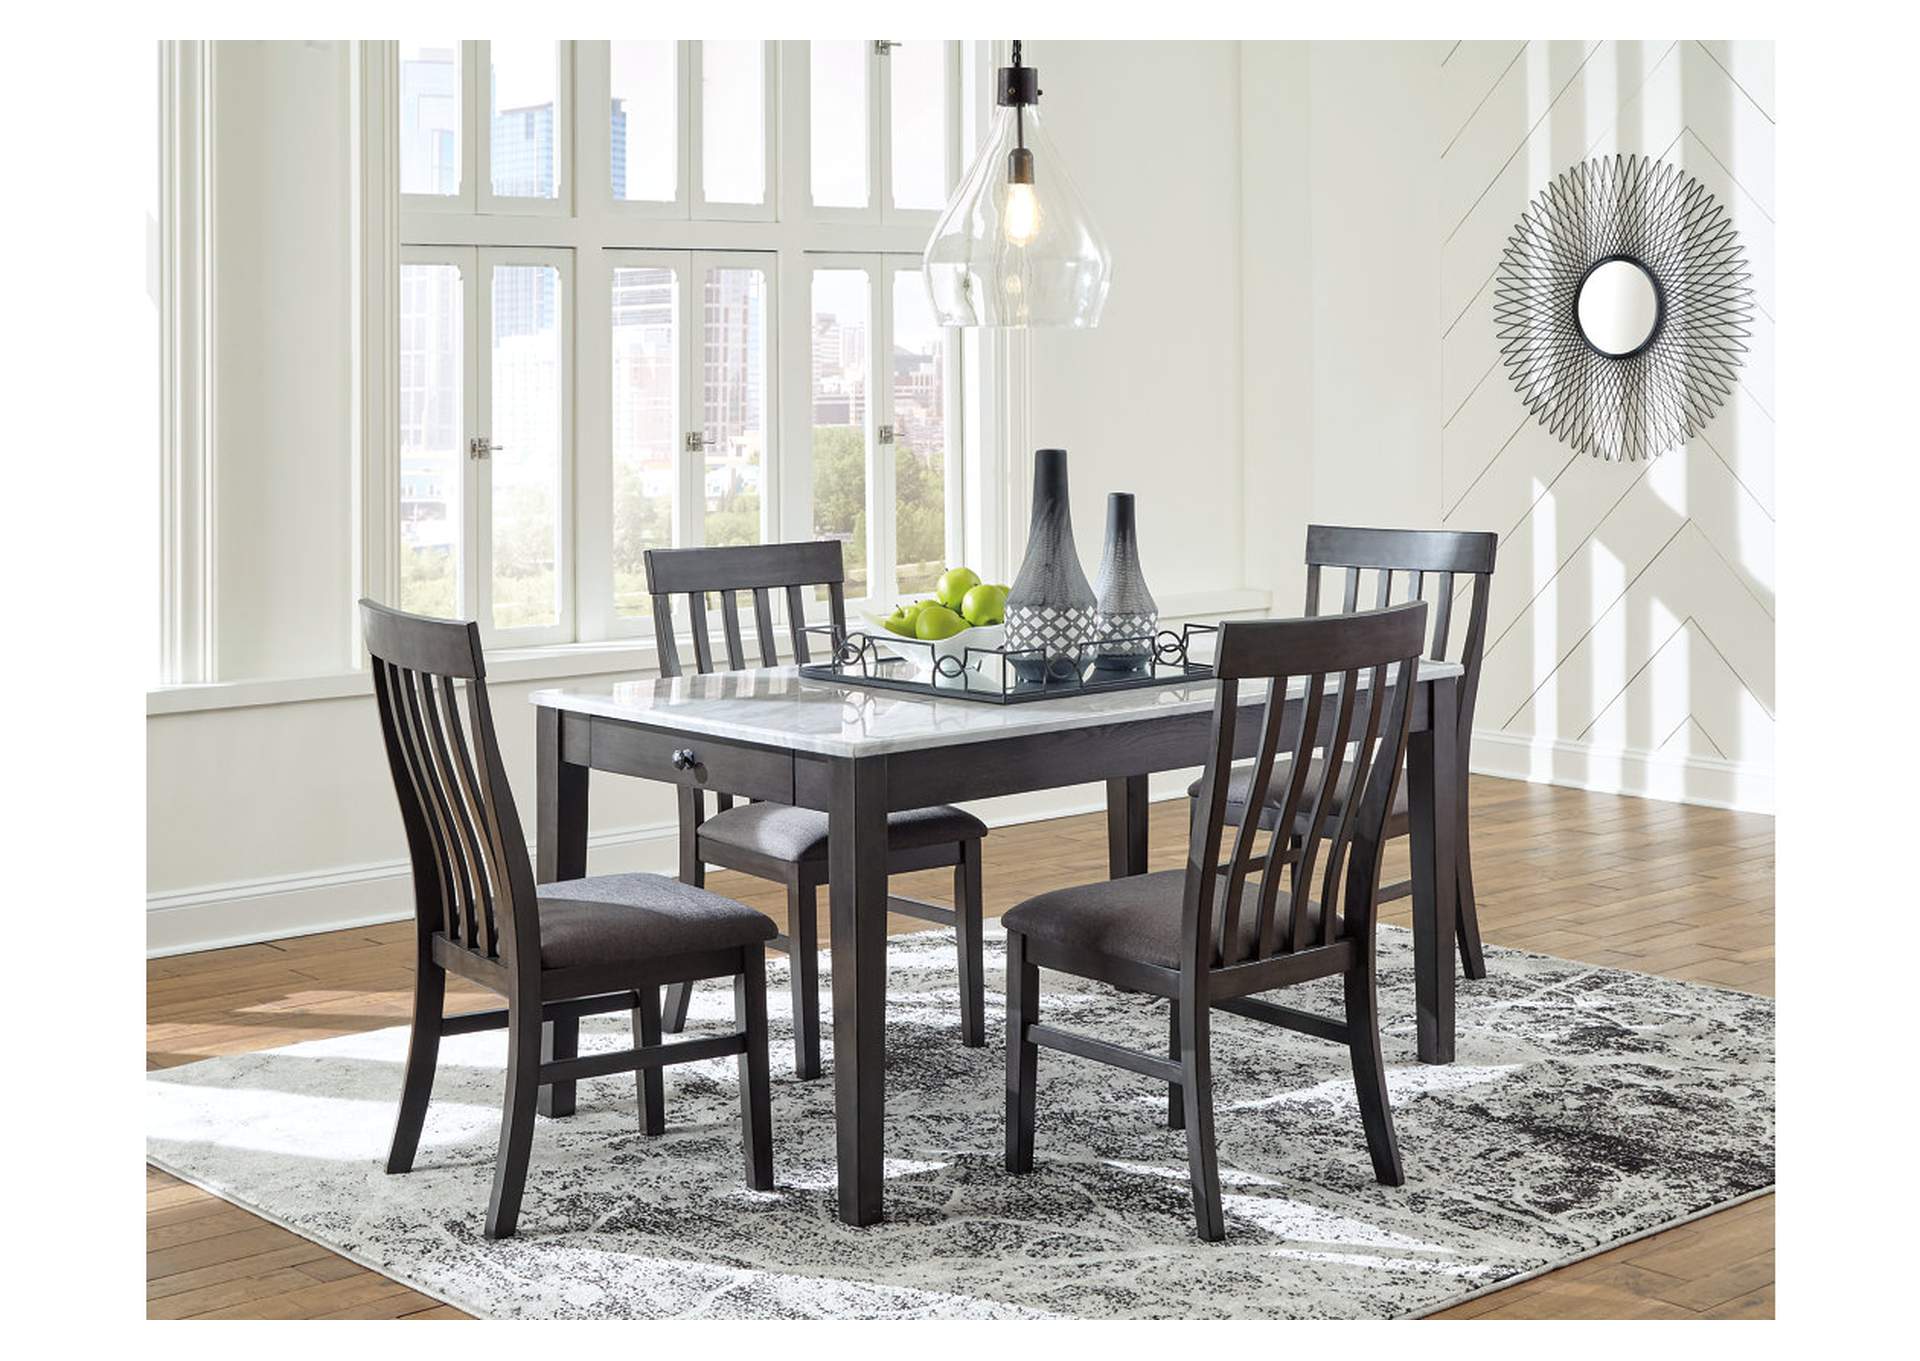 Ivan Smith Luvoni Charcoal Dining Table W4 Side Chair